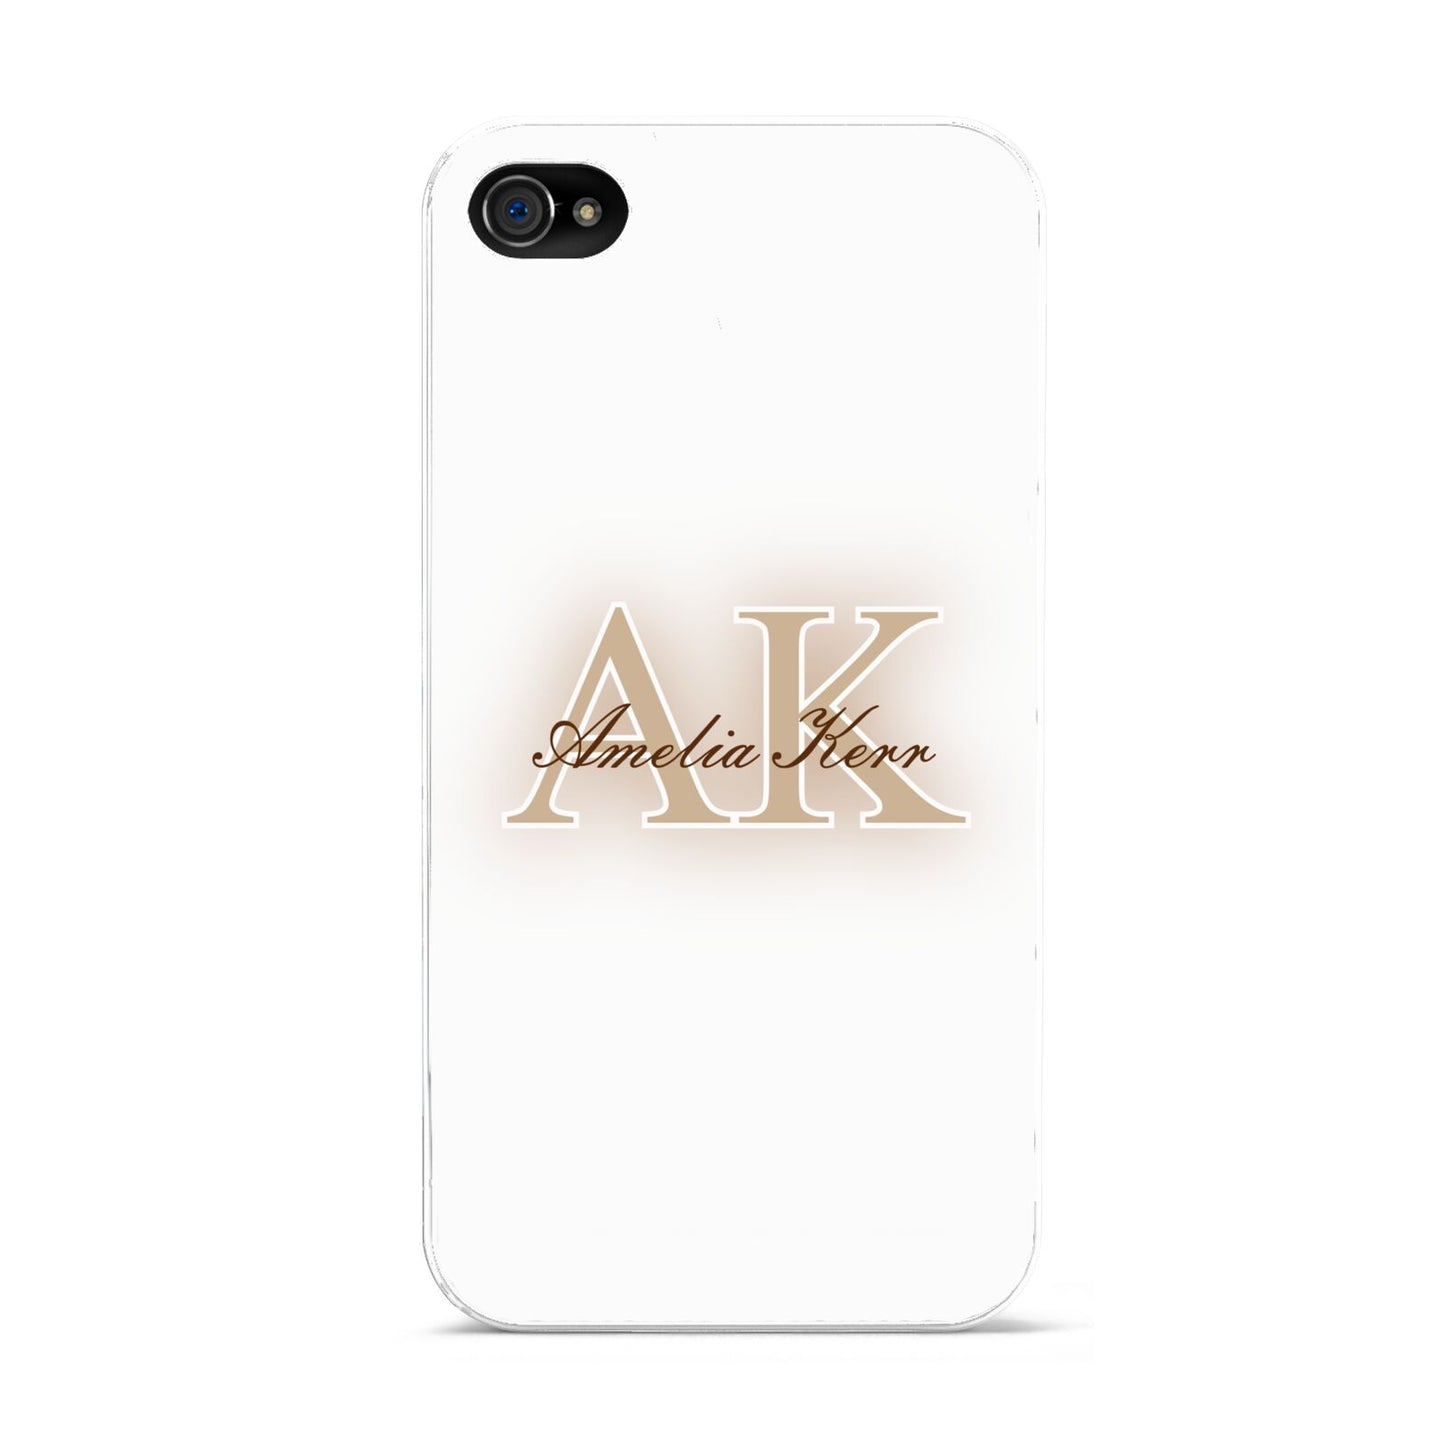 Shadow Initial Personalised Apple iPhone 4s Case